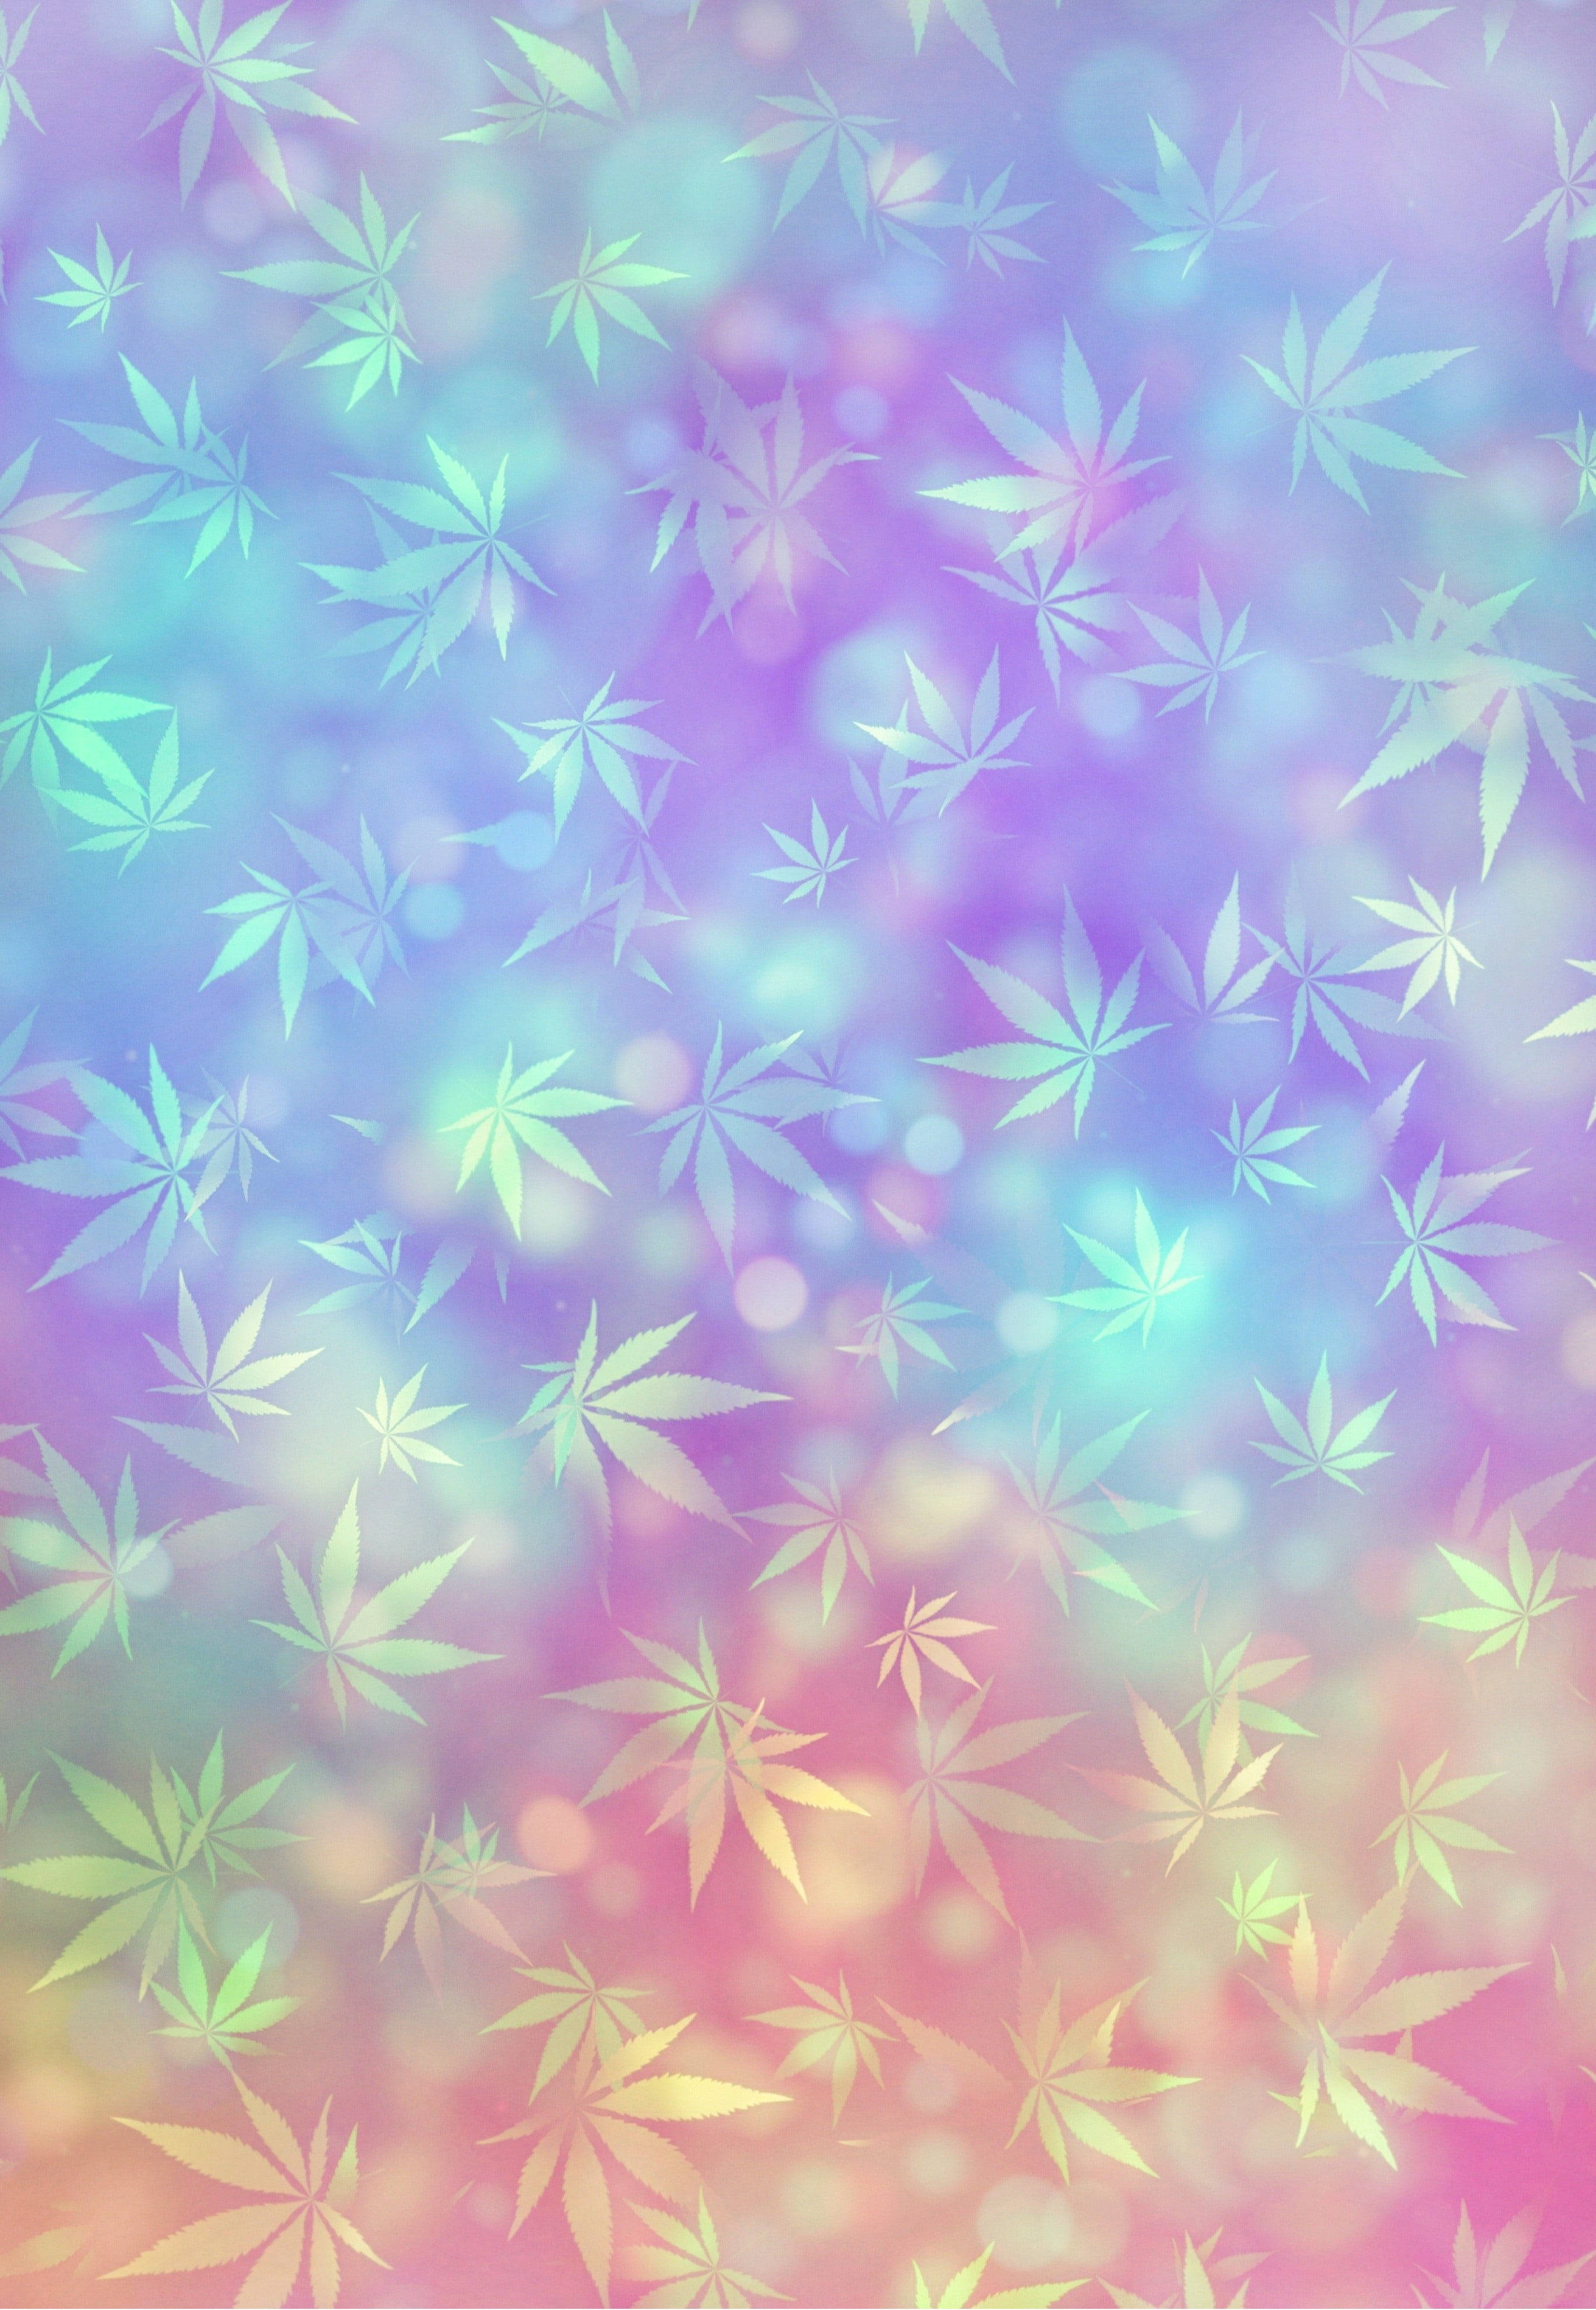 Download Dreamy Weed Leaves For Iphone Wallpaper 